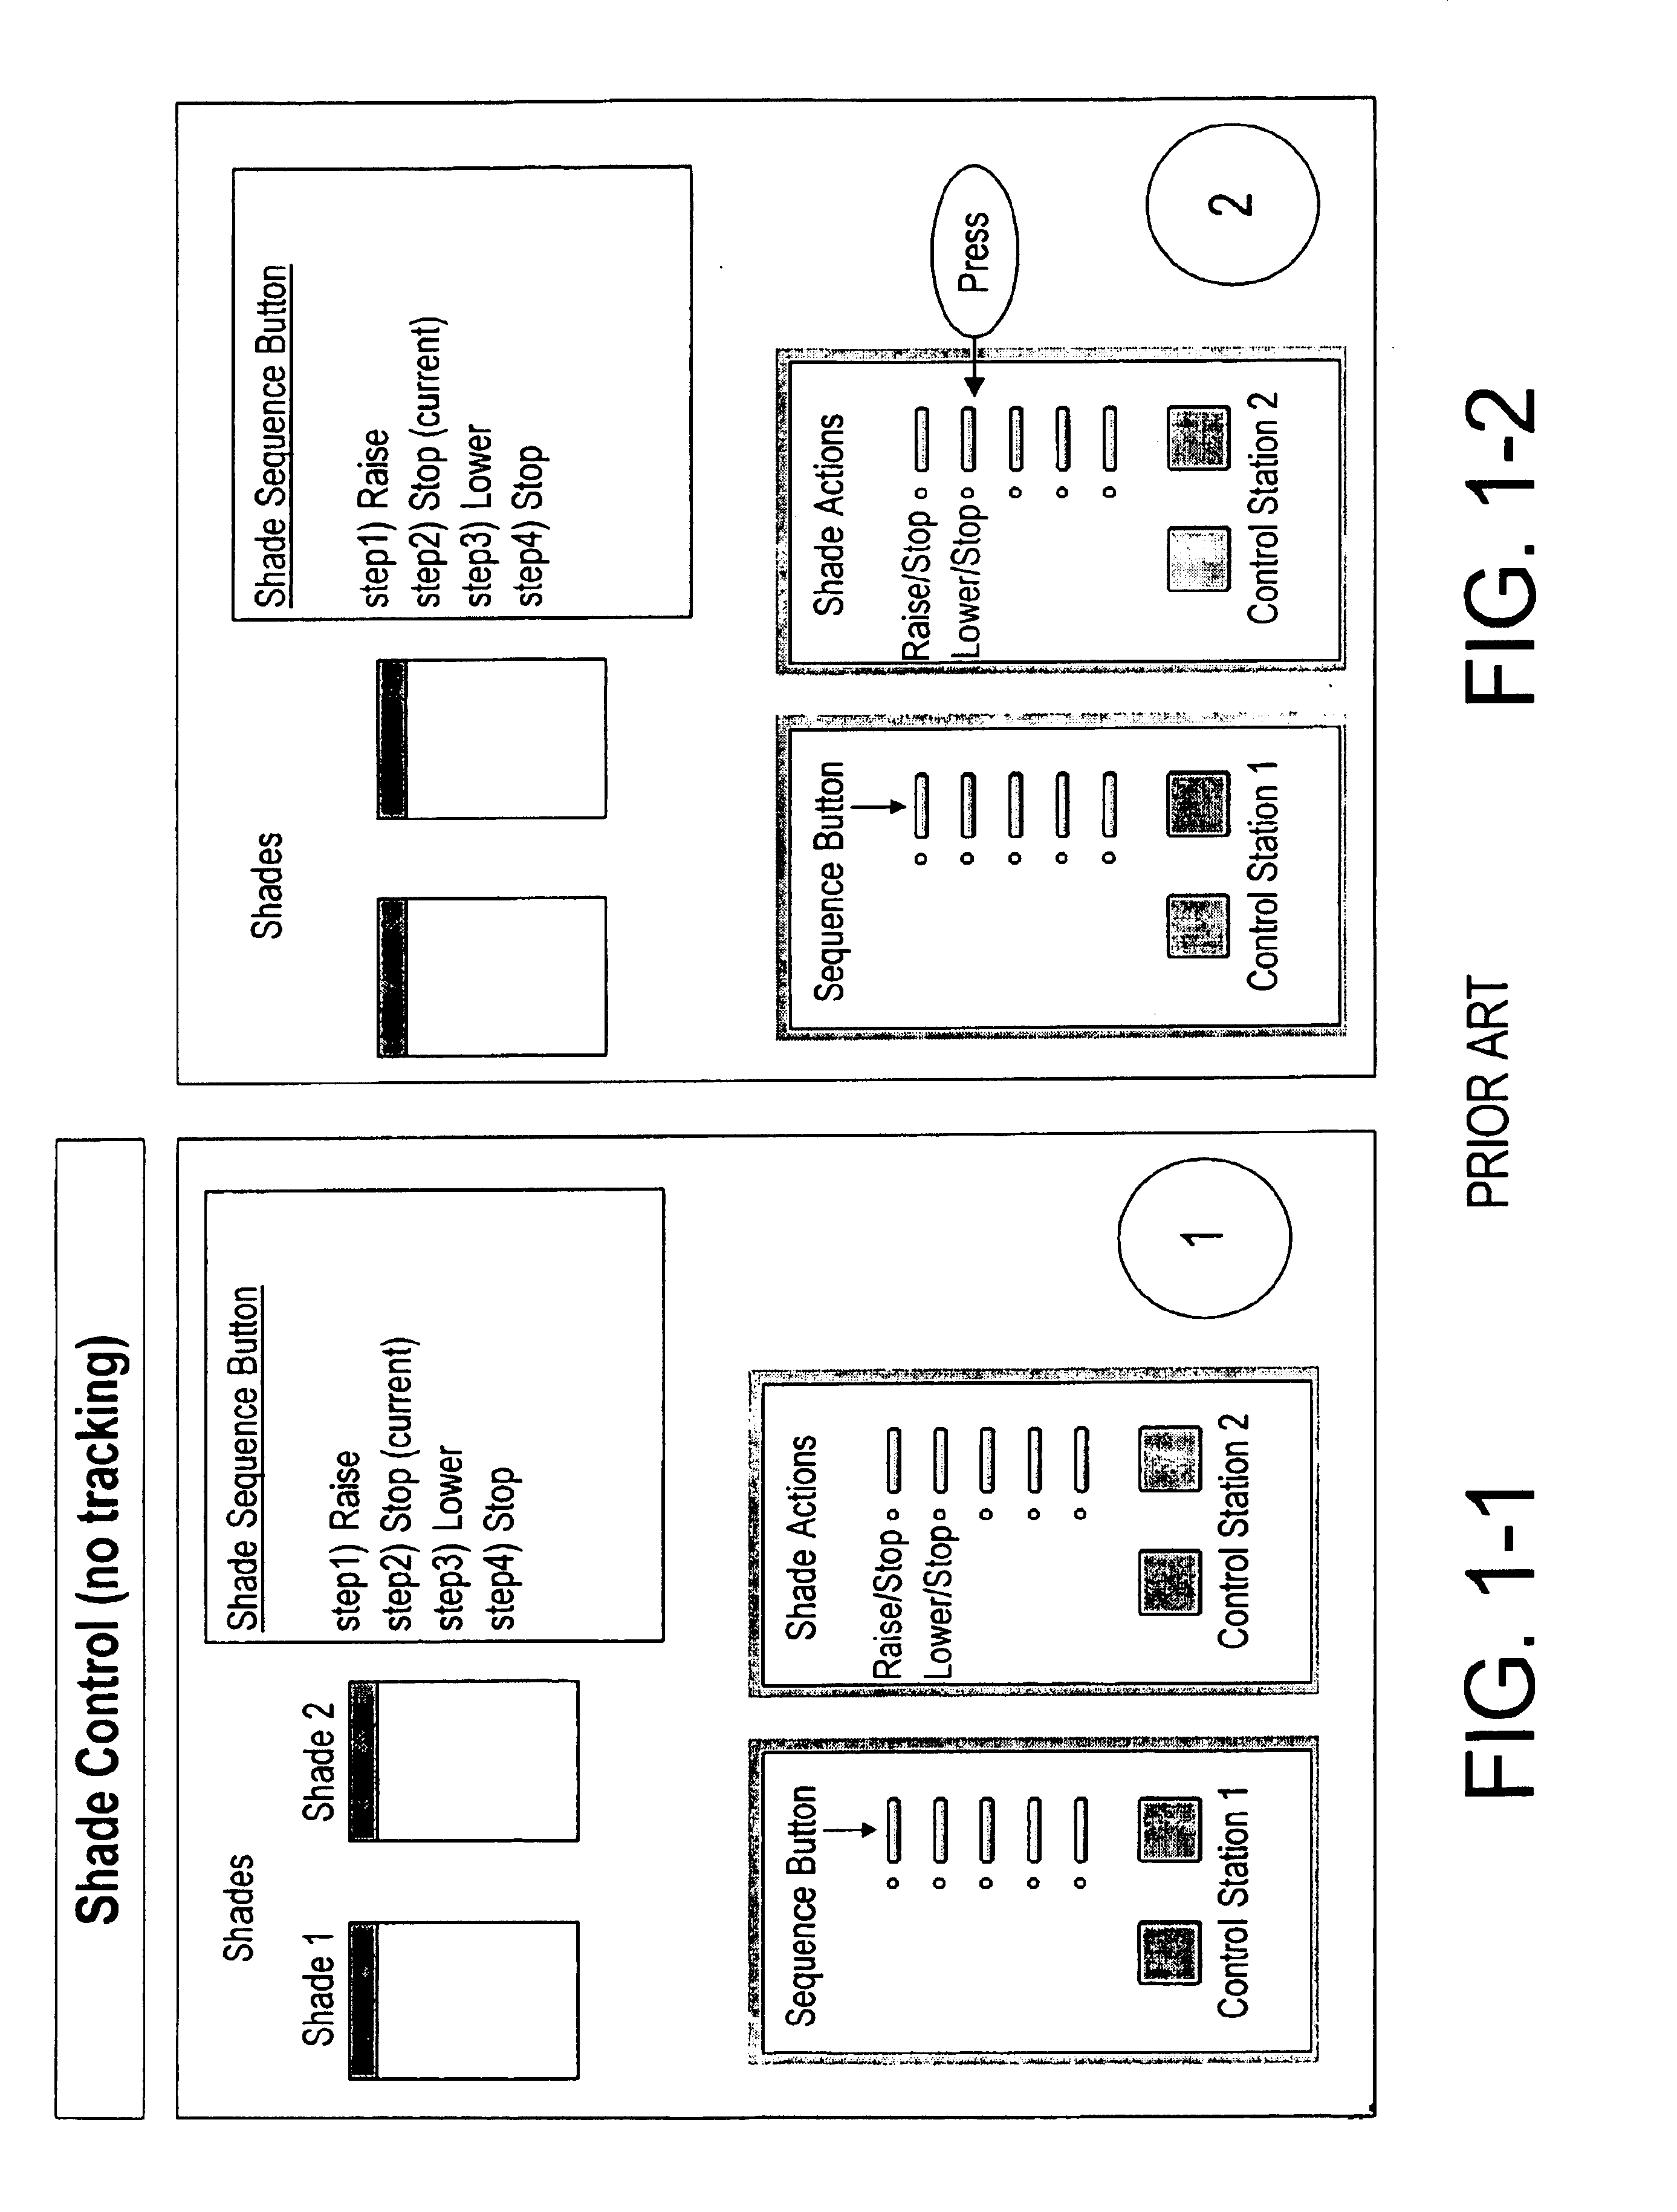 Method and apparatus for tracking sequences of an electrical device controllable from multiple locations